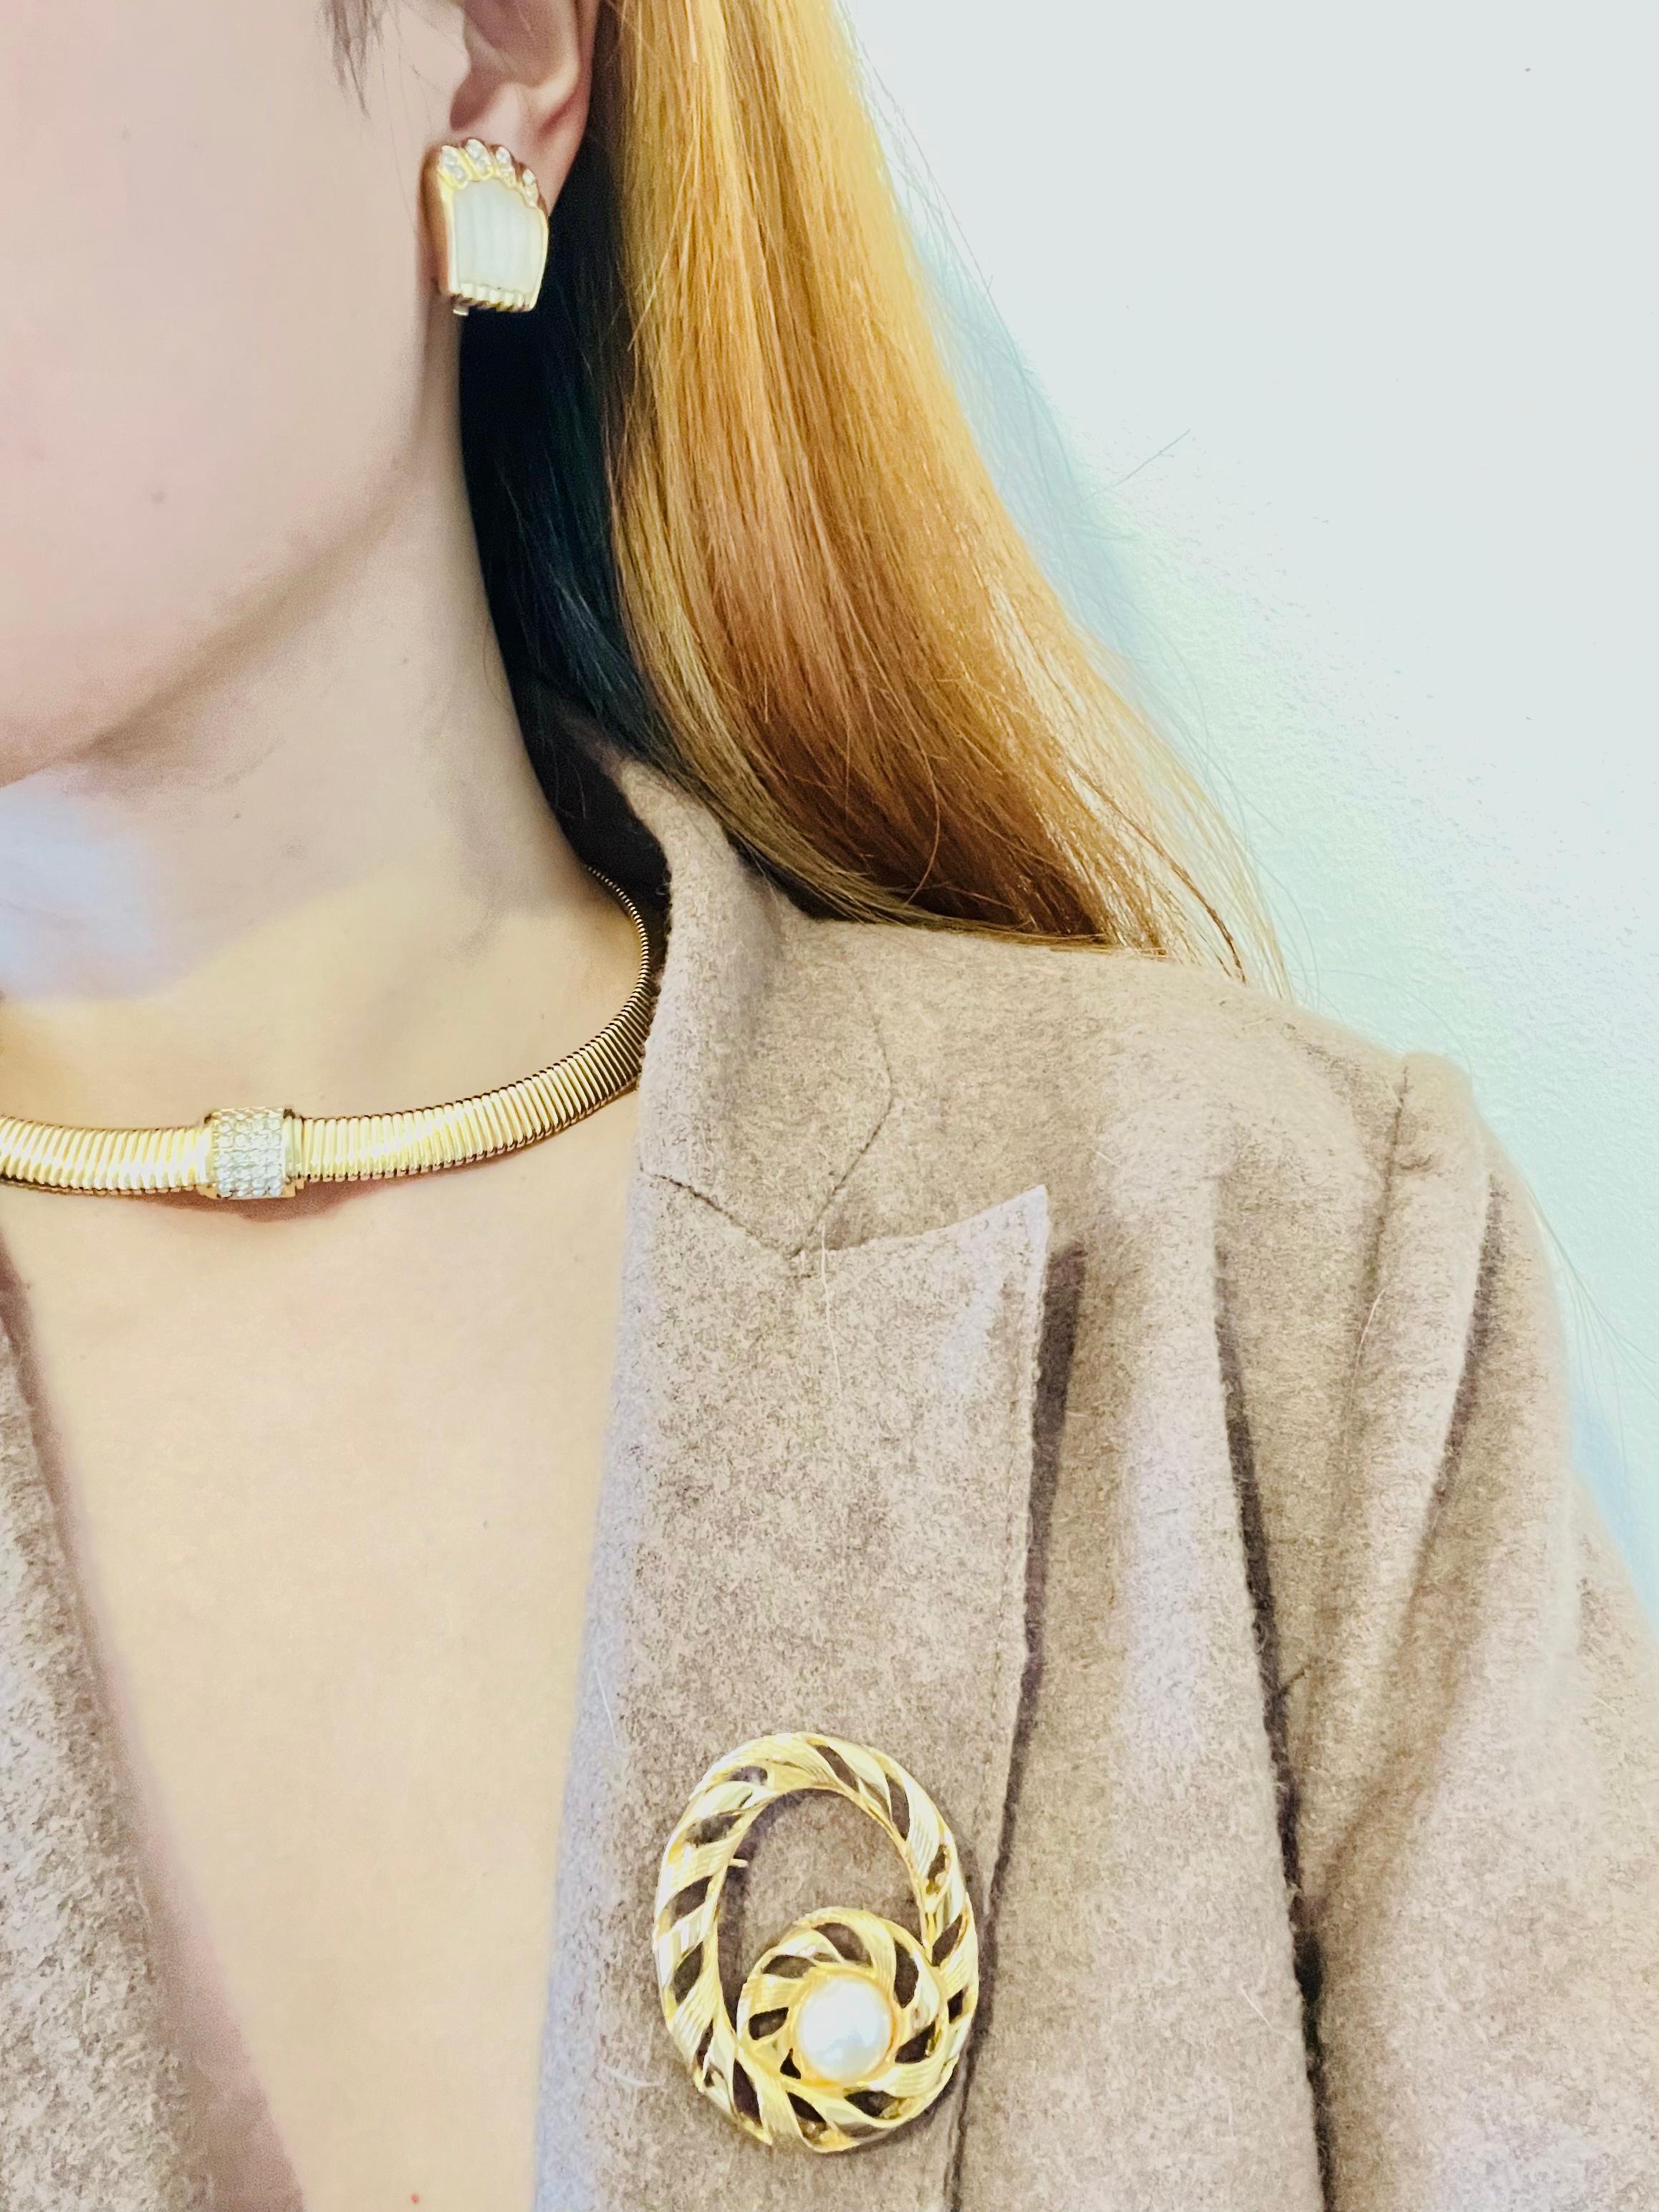 Christian Dior Vintage 1980s Crystals Square Pendant Omega Choker Gold Necklace In Excellent Condition For Sale In Wokingham, England